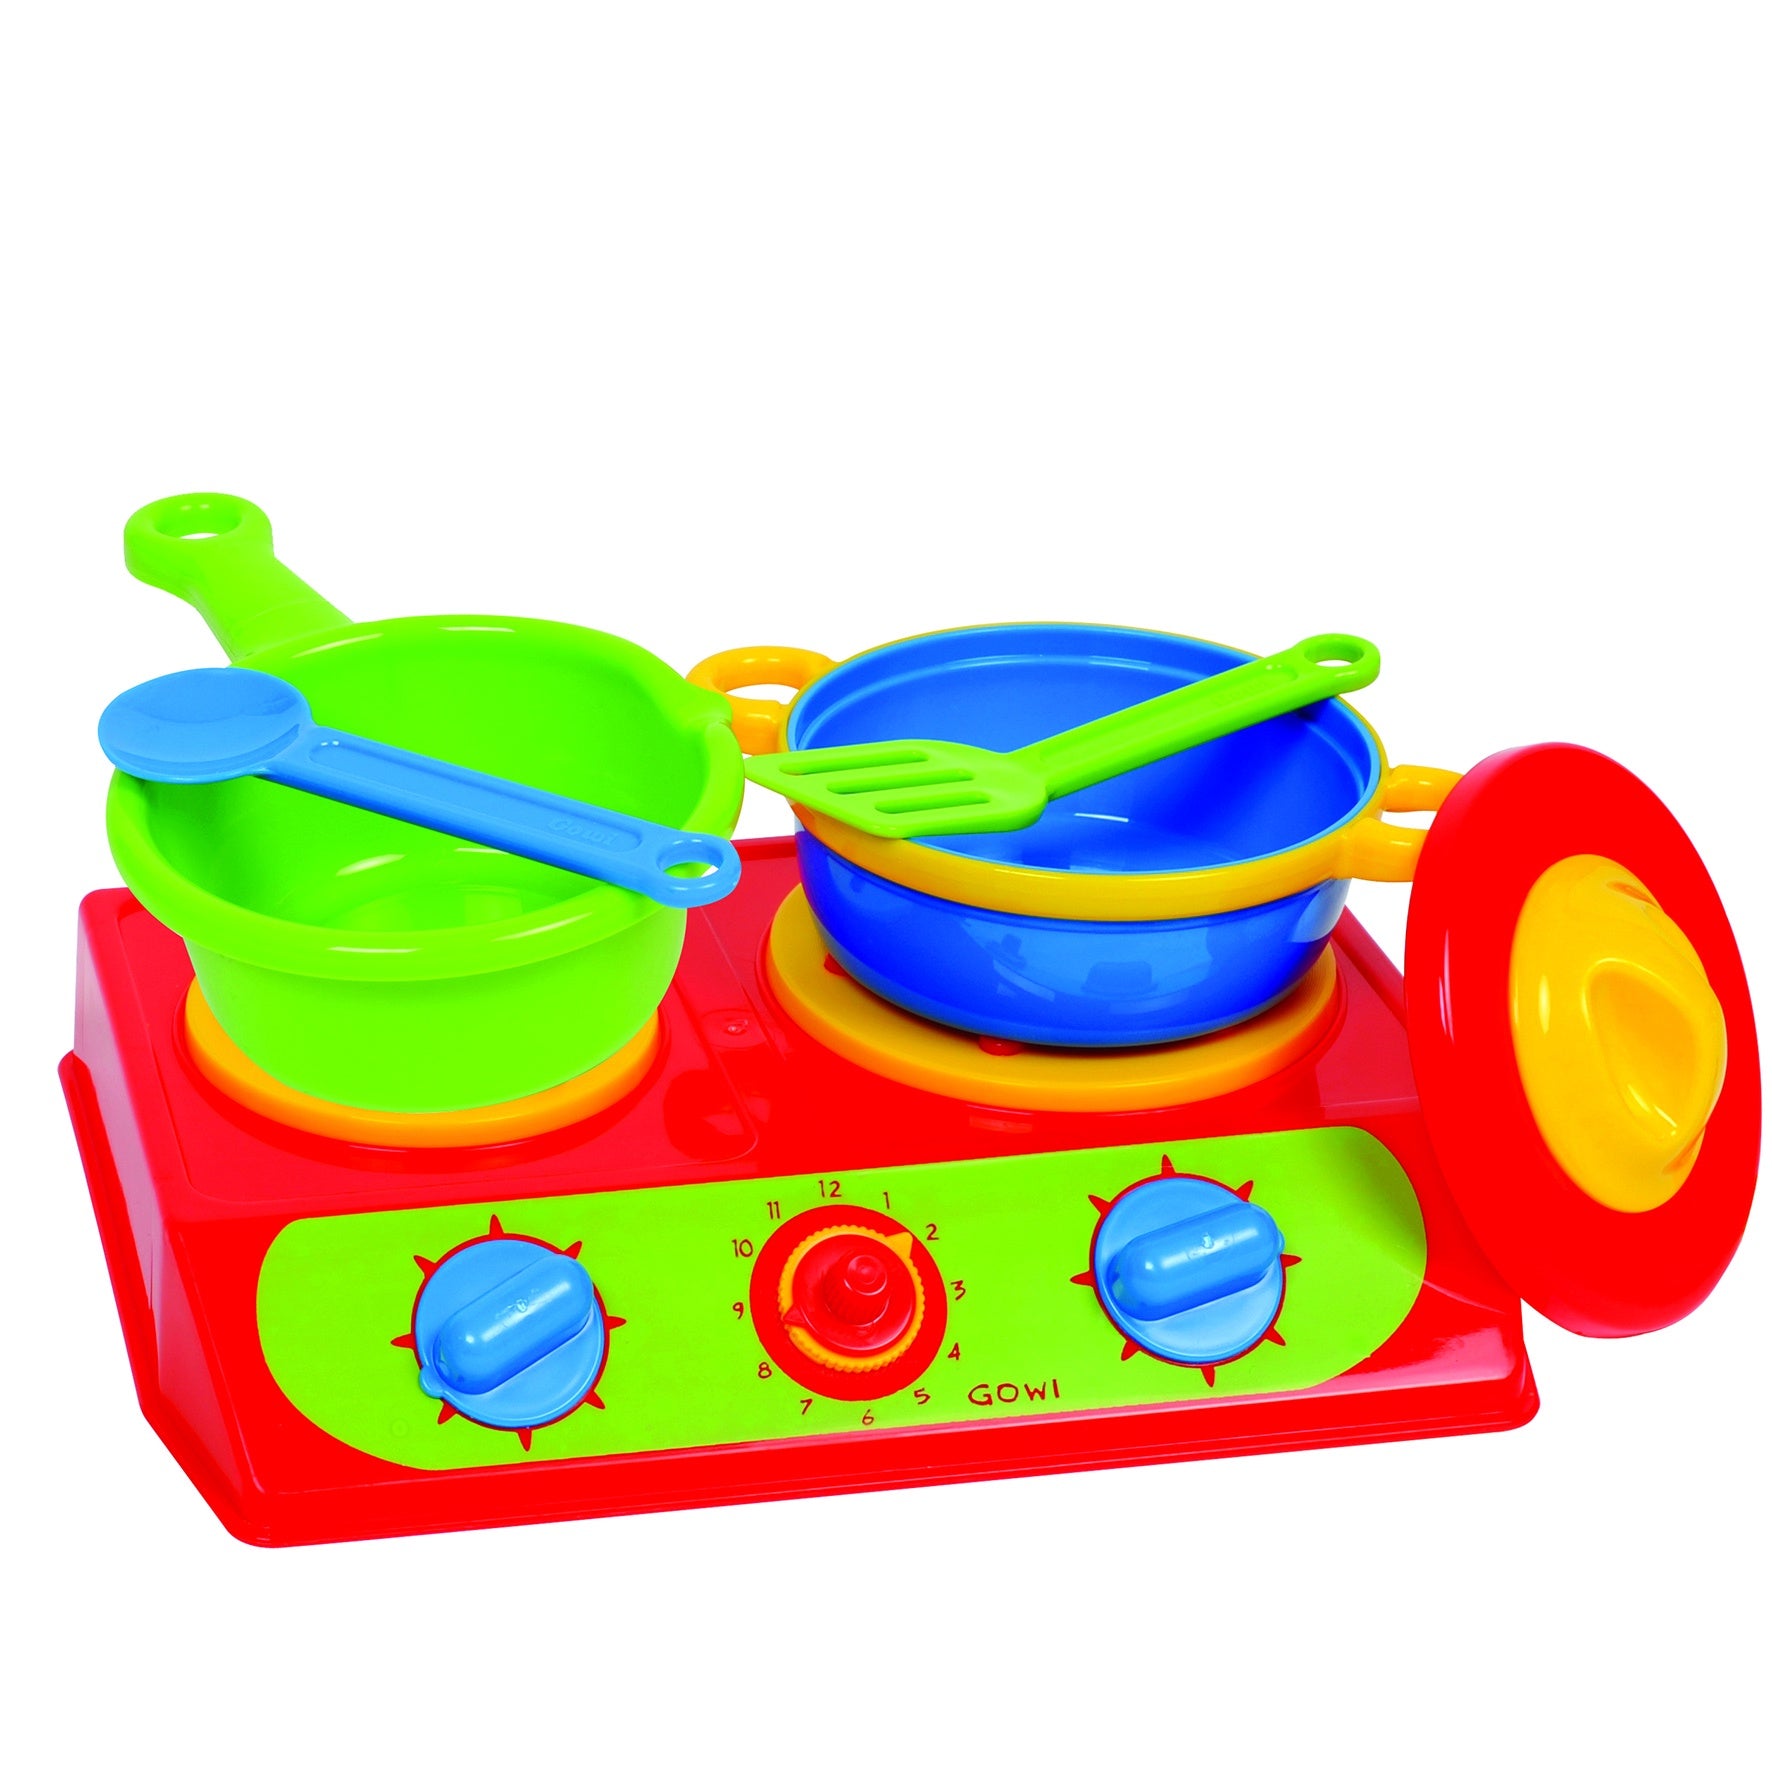 GOWI TOYS - Double Stove -  6 Piece